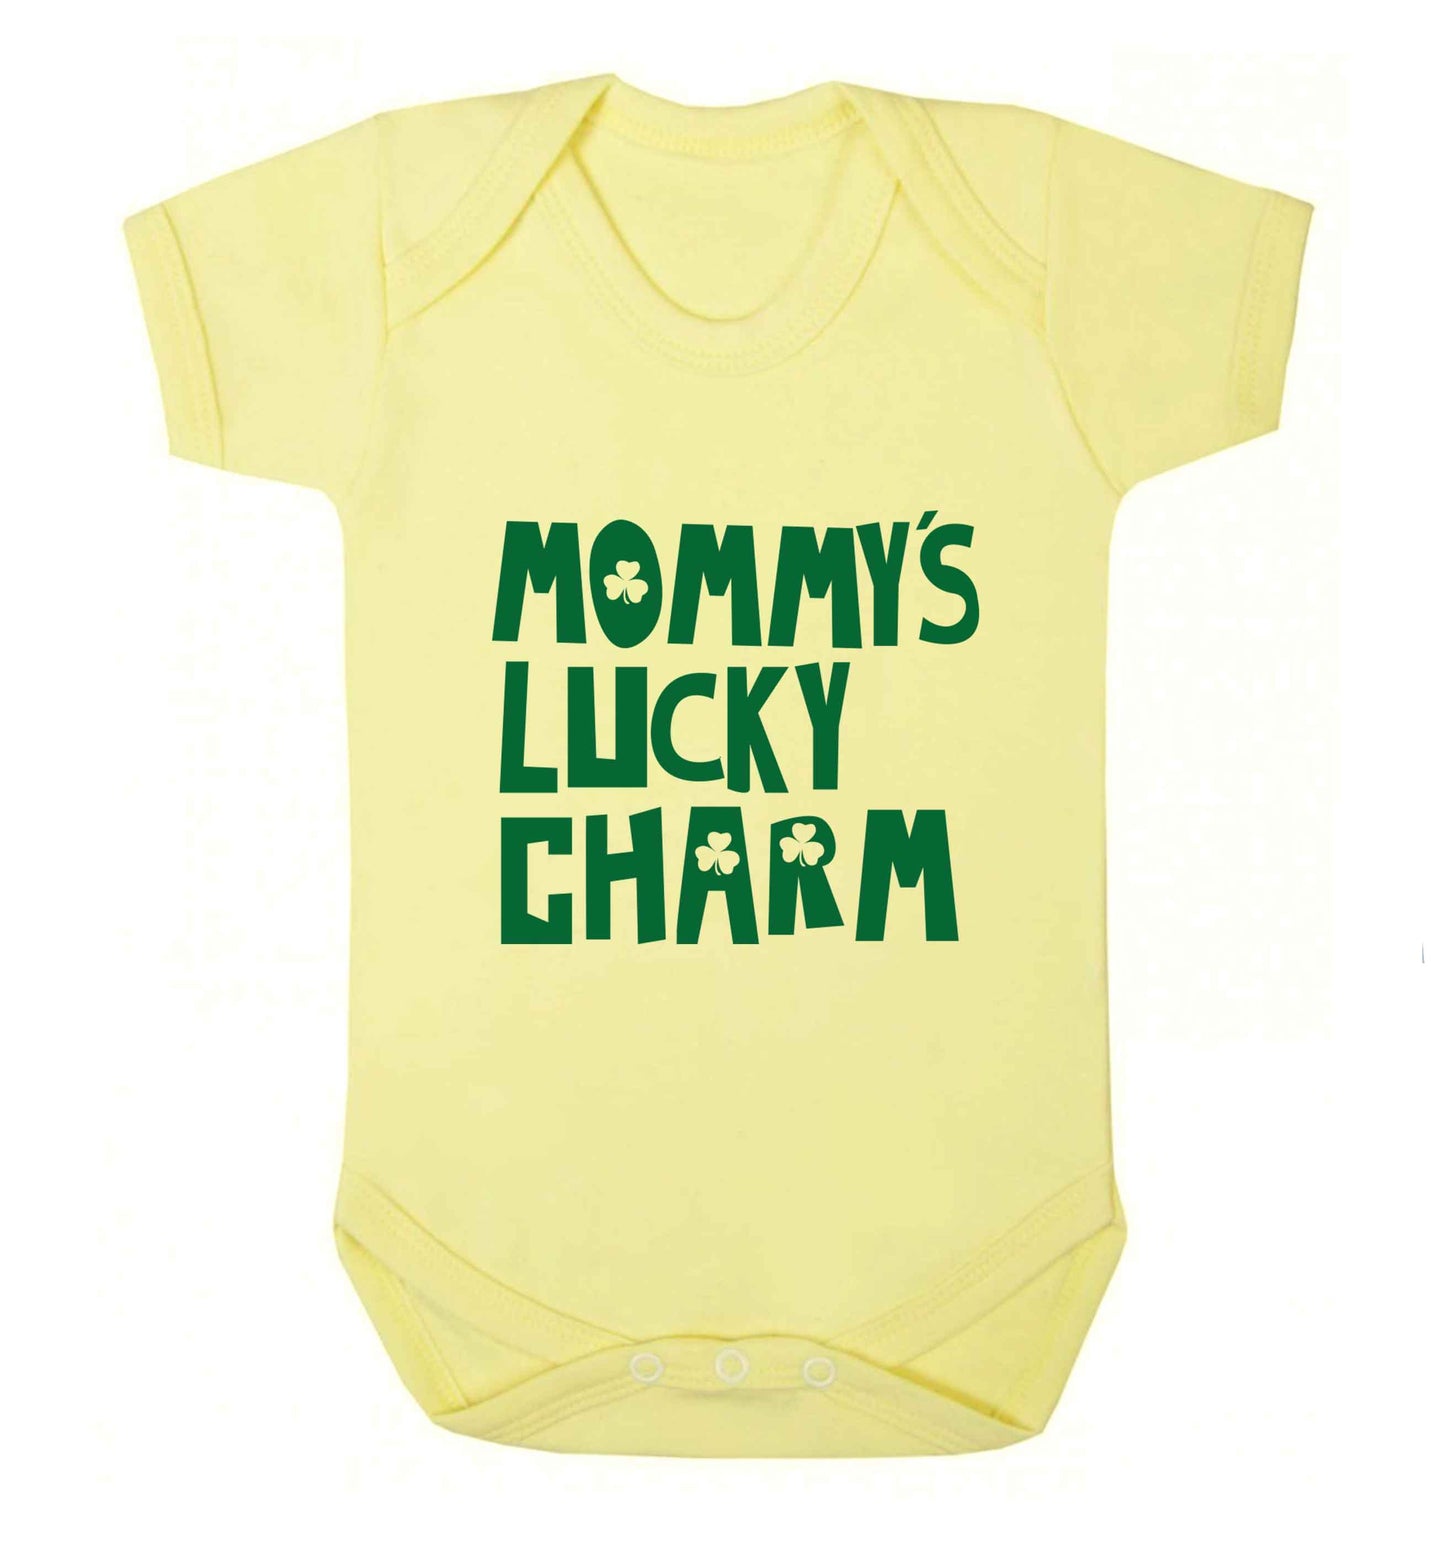 Mommy's lucky charm baby vest pale yellow 18-24 months